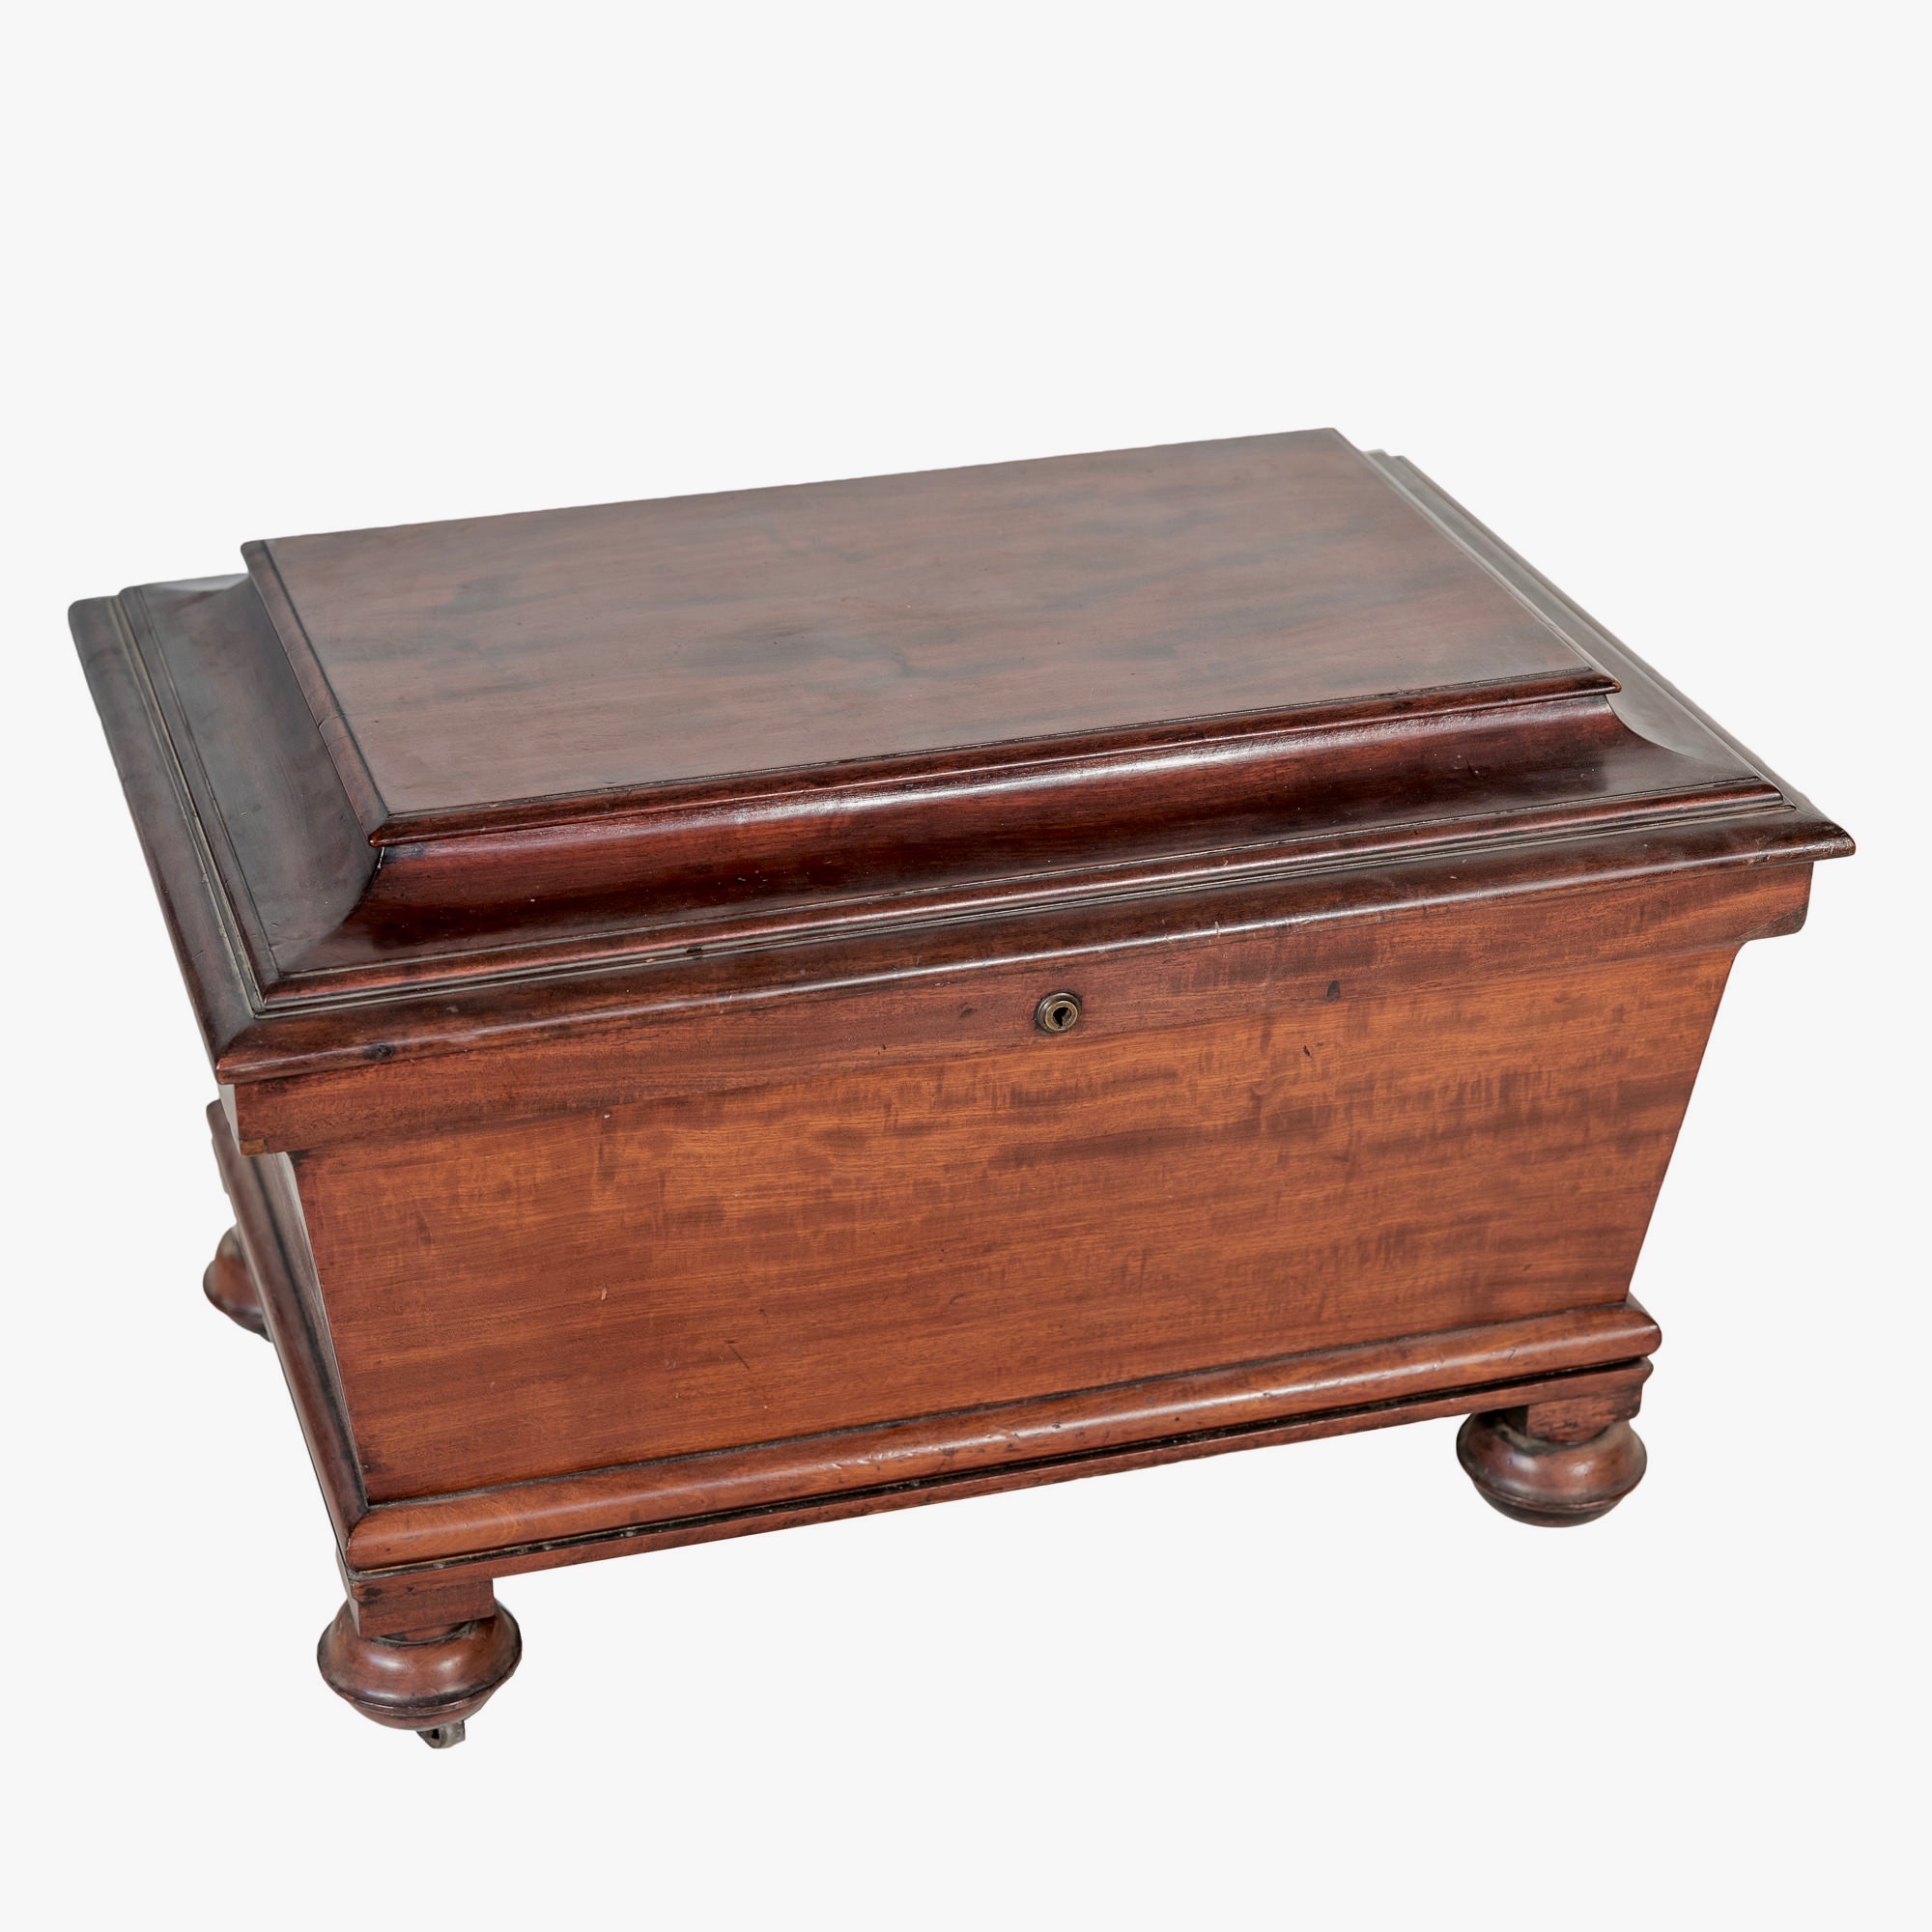 'George IV Mahogany Sarcophagus Wine Cooler With Lead Lined Interior Circa 1830'